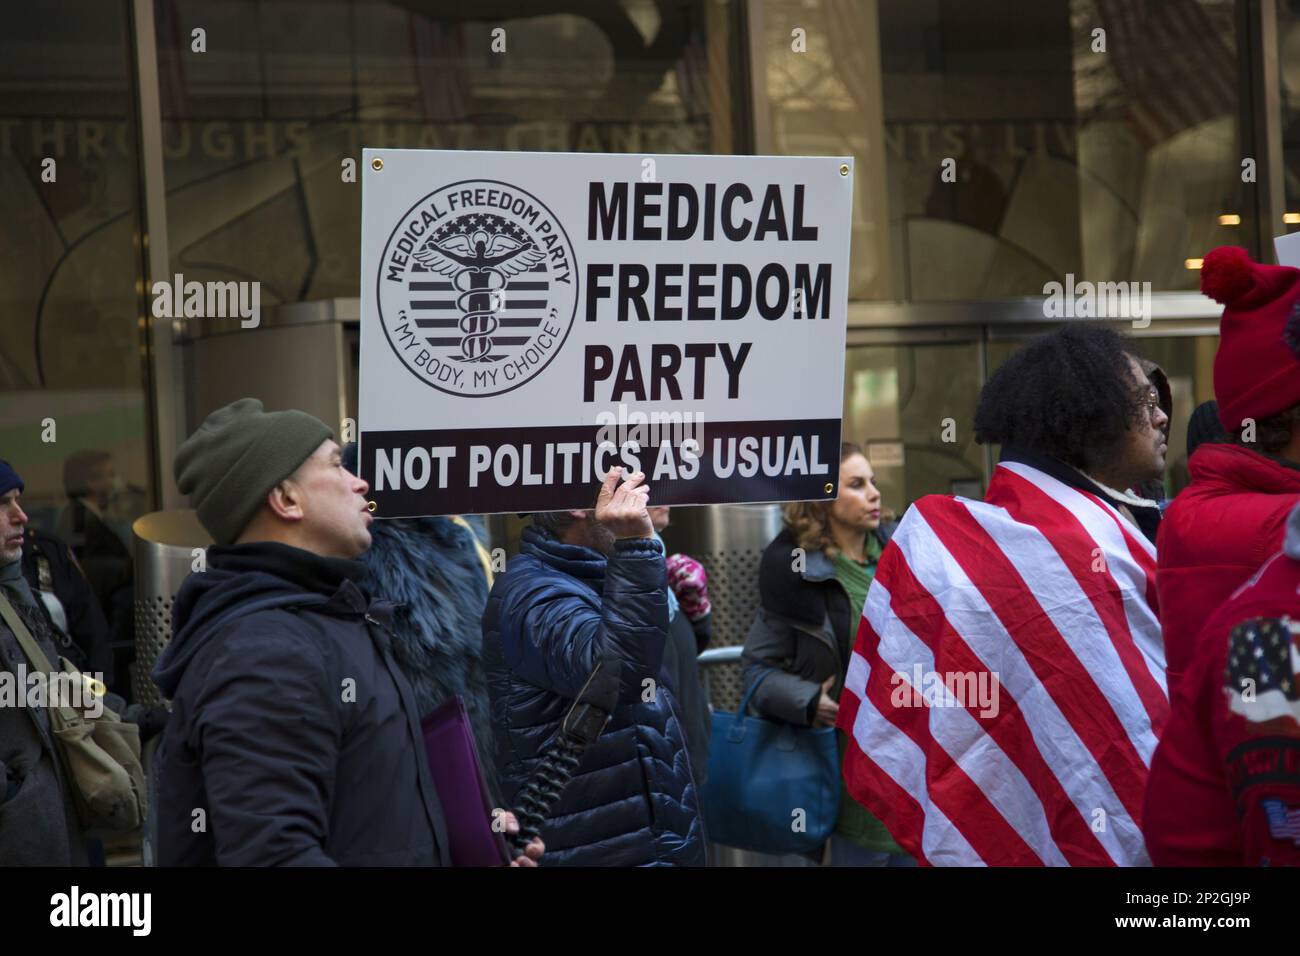 Medical Freedom Party members and others questioning the profit motives behind the quick production of the Covid vaccines demonstrate in front of Pfizer World headquarters on 42nd Street in Manhattan, New York City. Stock Photo